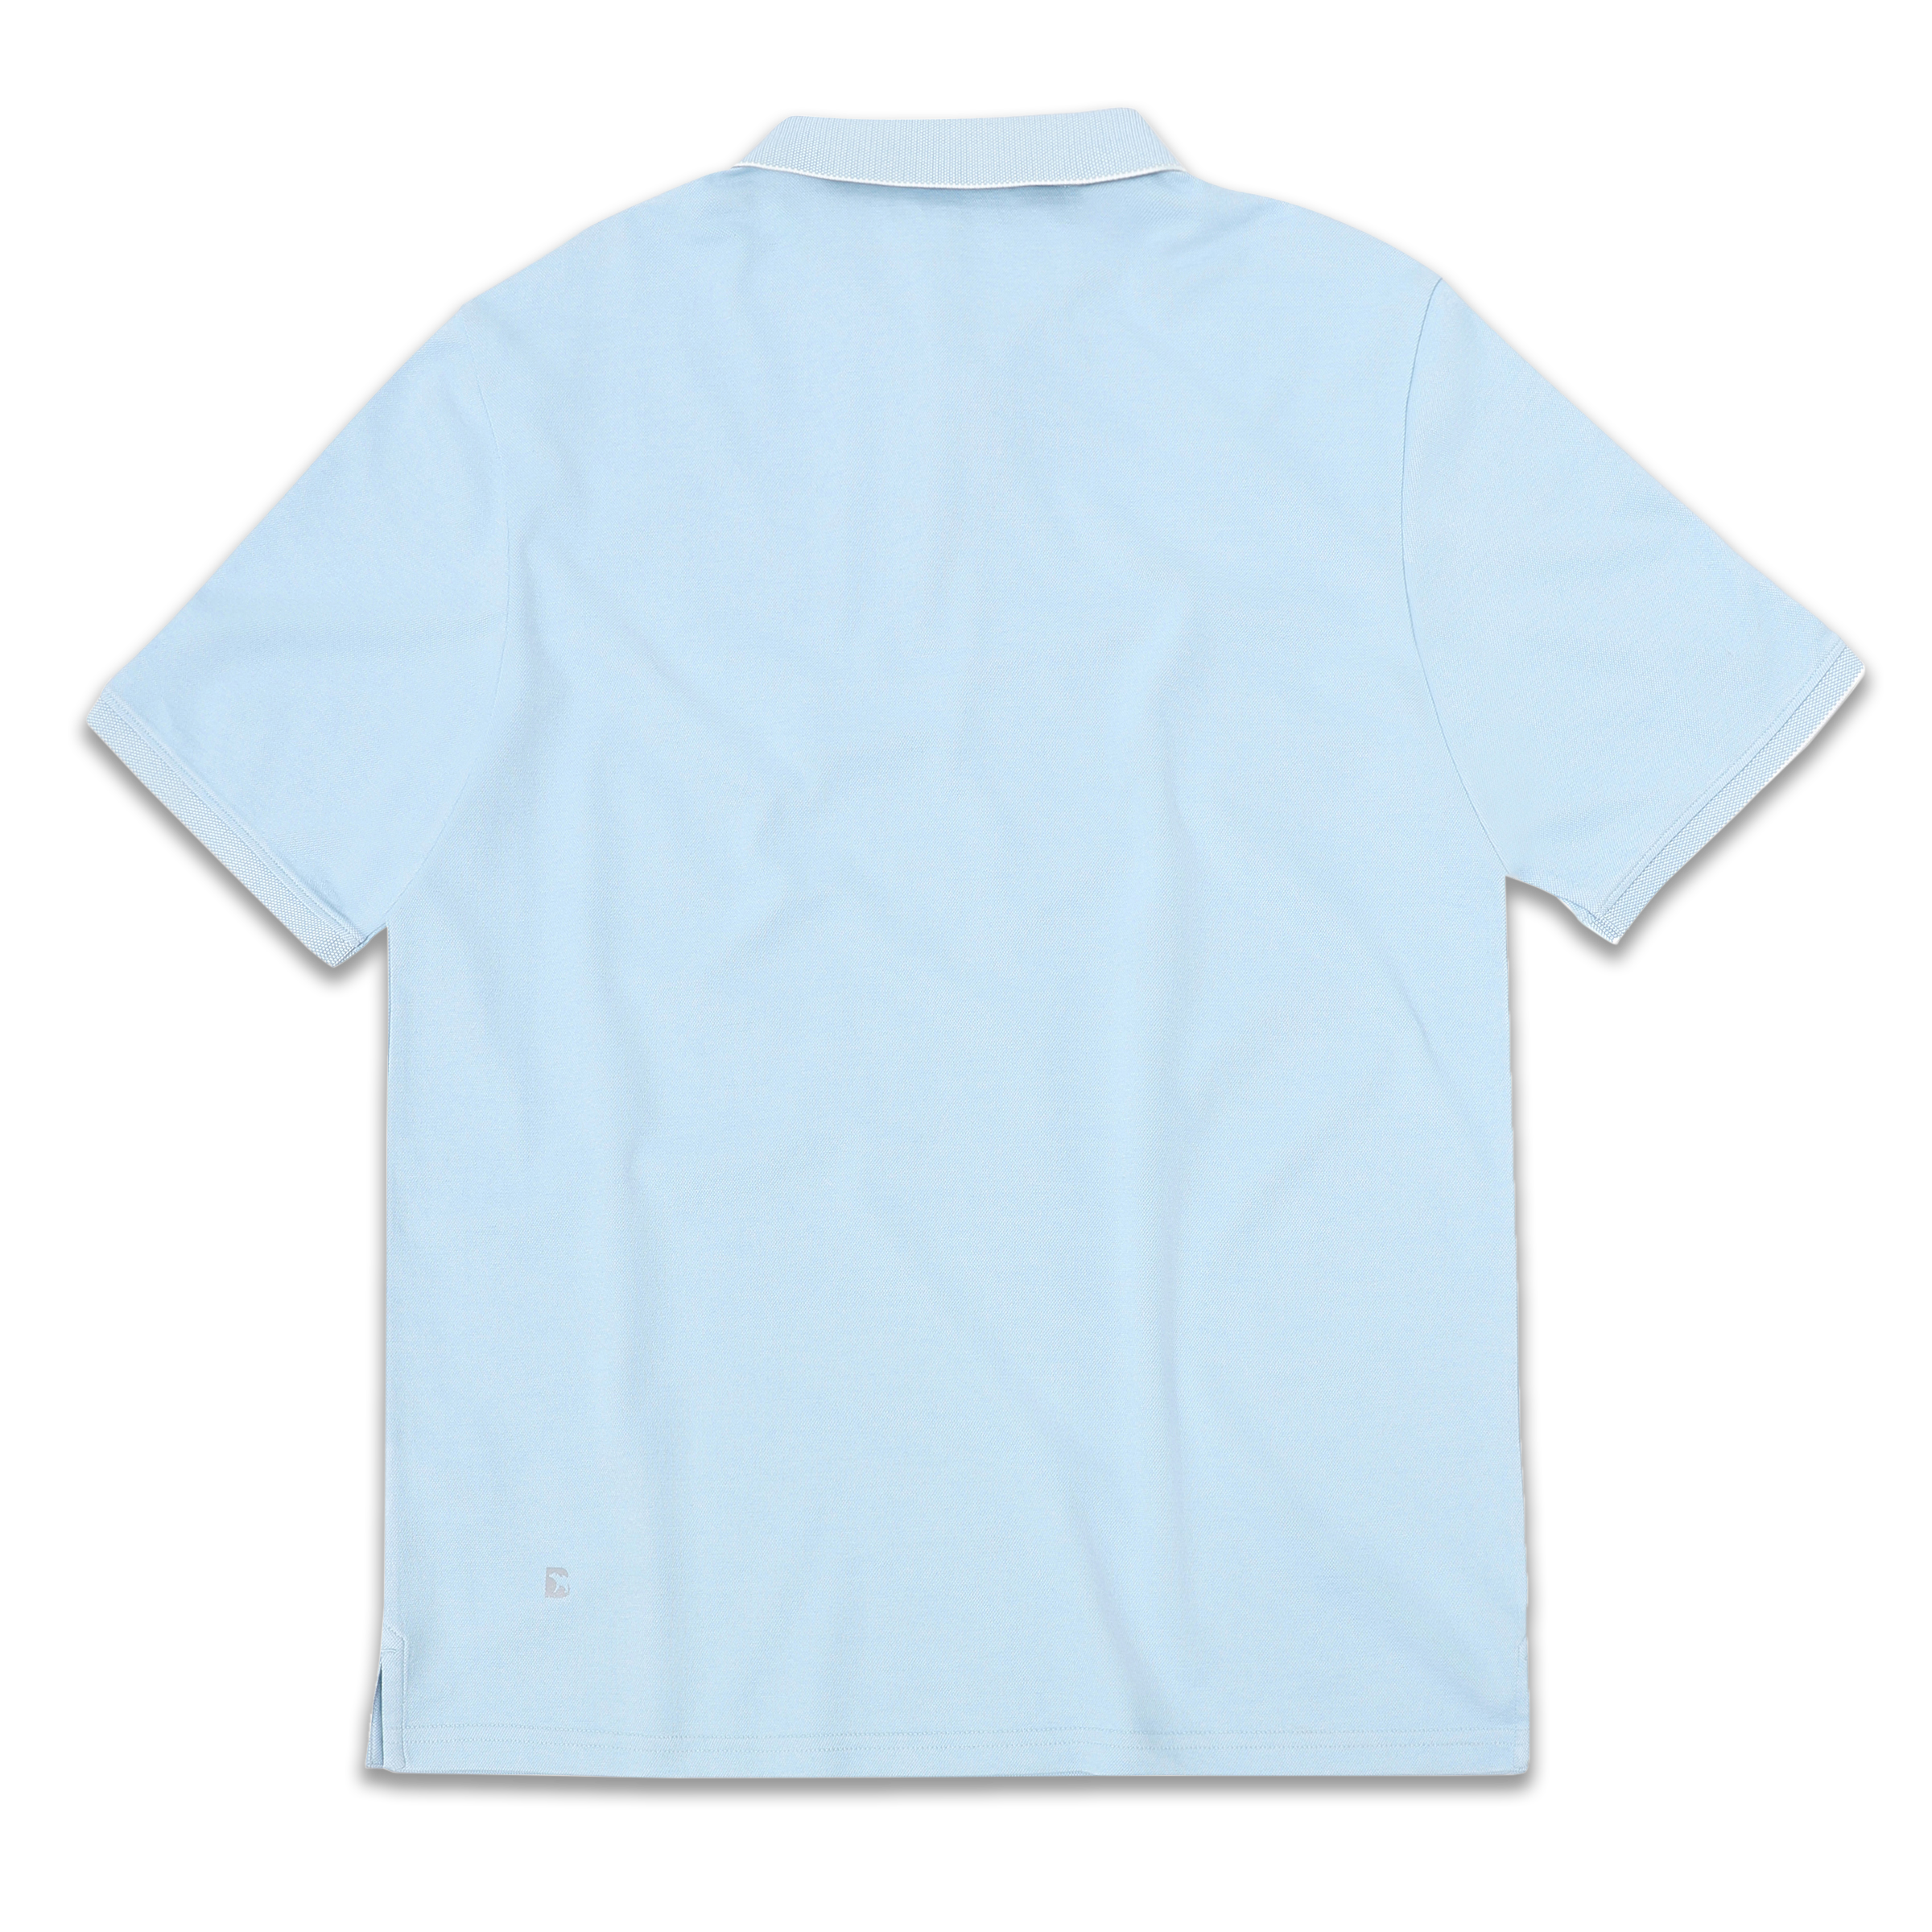 Range Polo Sky Blue back with ribbed collar, ribbed short sleeves, and Bearbottom B logo in bottom left corner